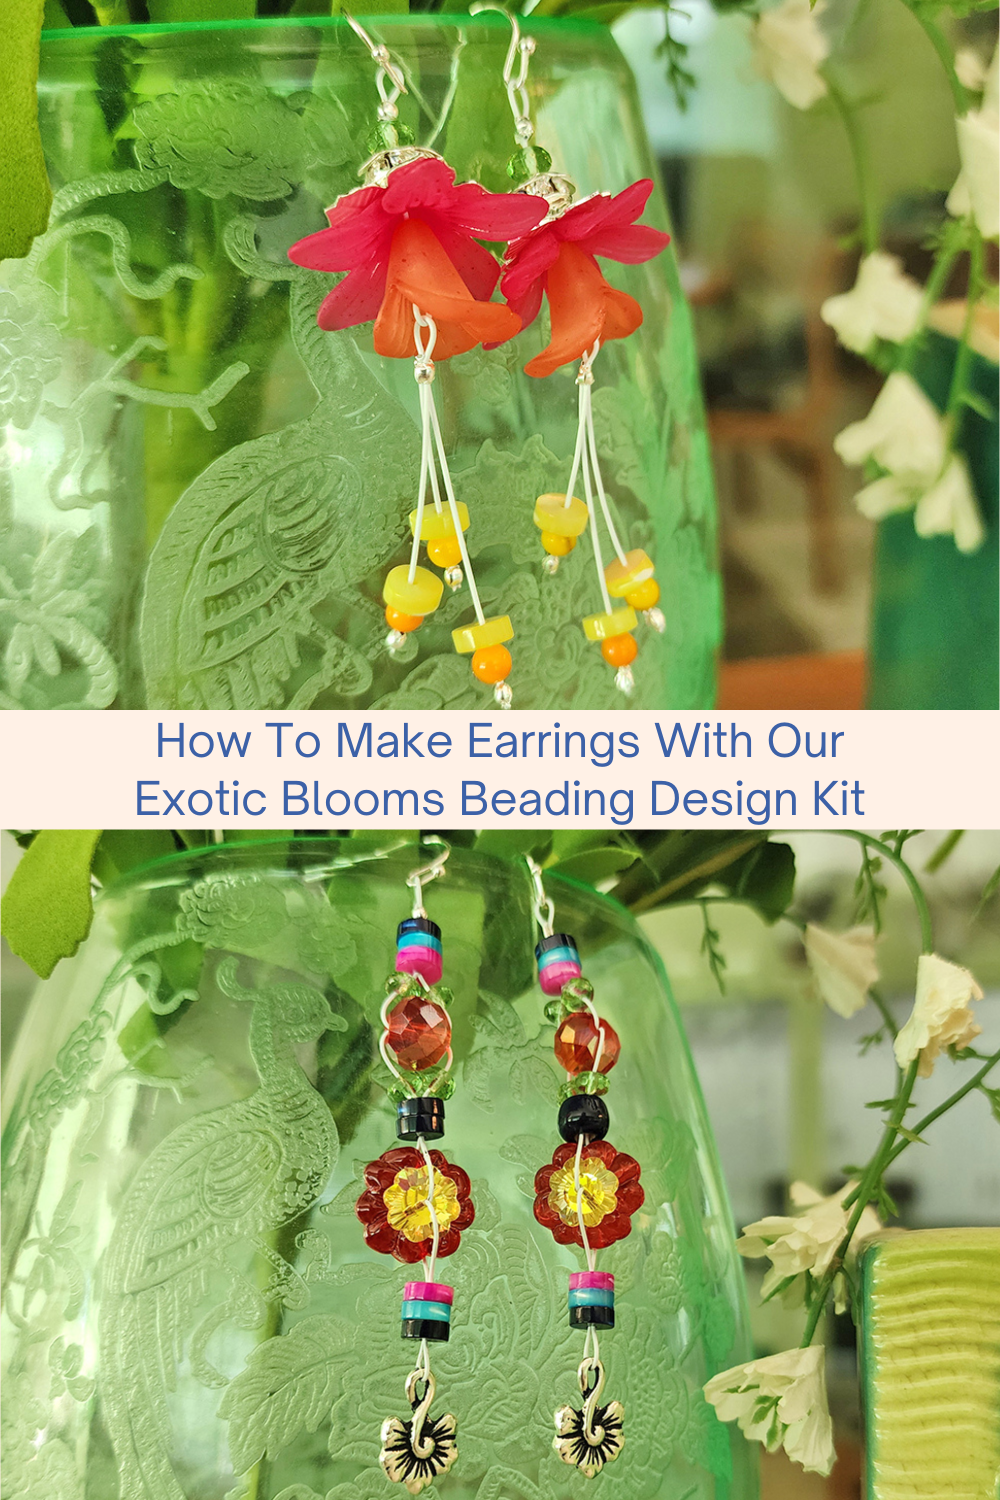 How To Make Earrings With Our Exotic Blooms Beading Design Kit Collage